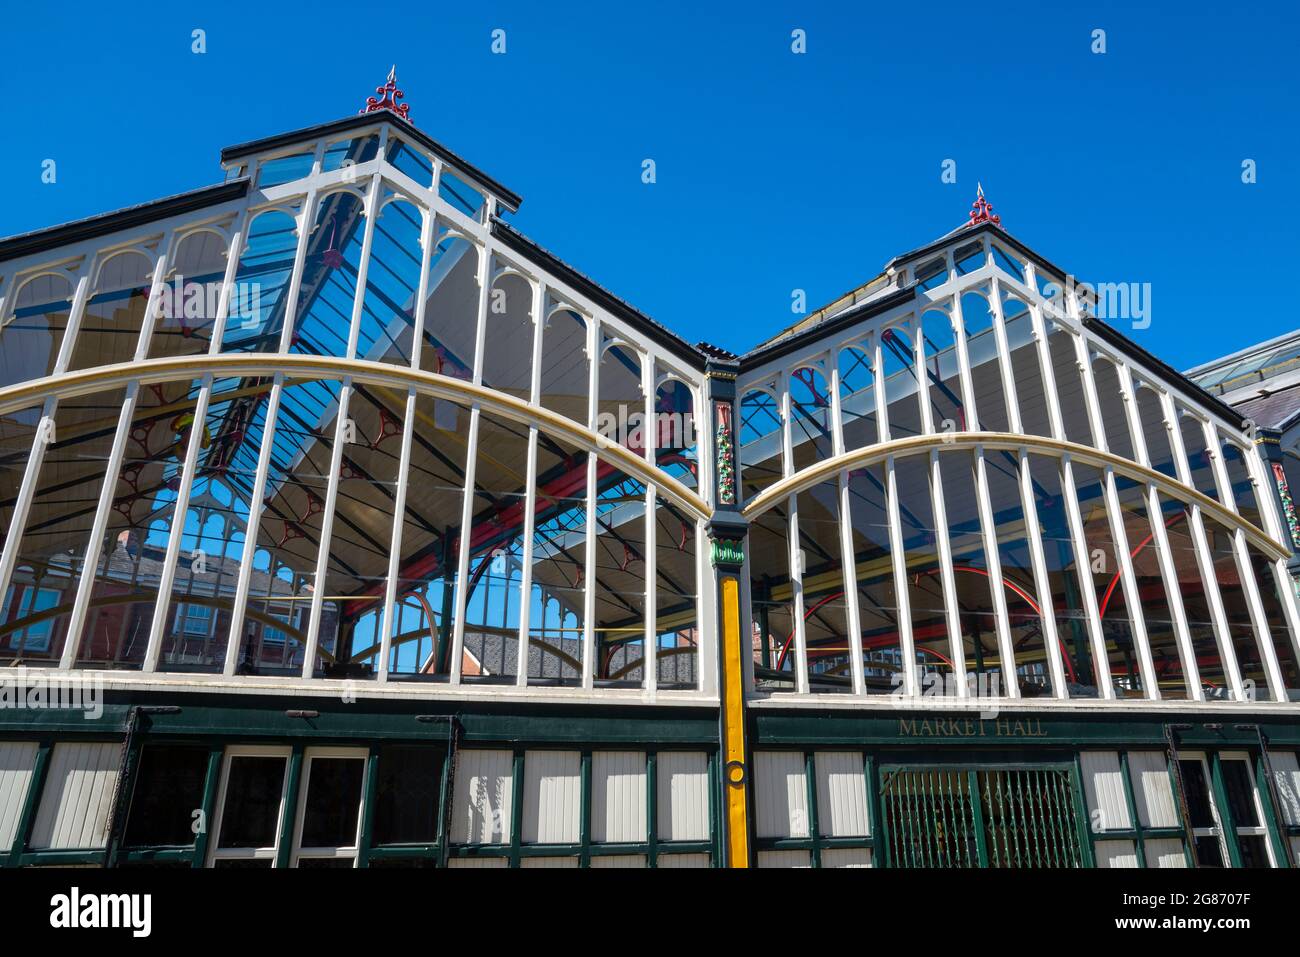 Old Victorian market hall in Stockport, Greater Manchester, England. Stock Photo